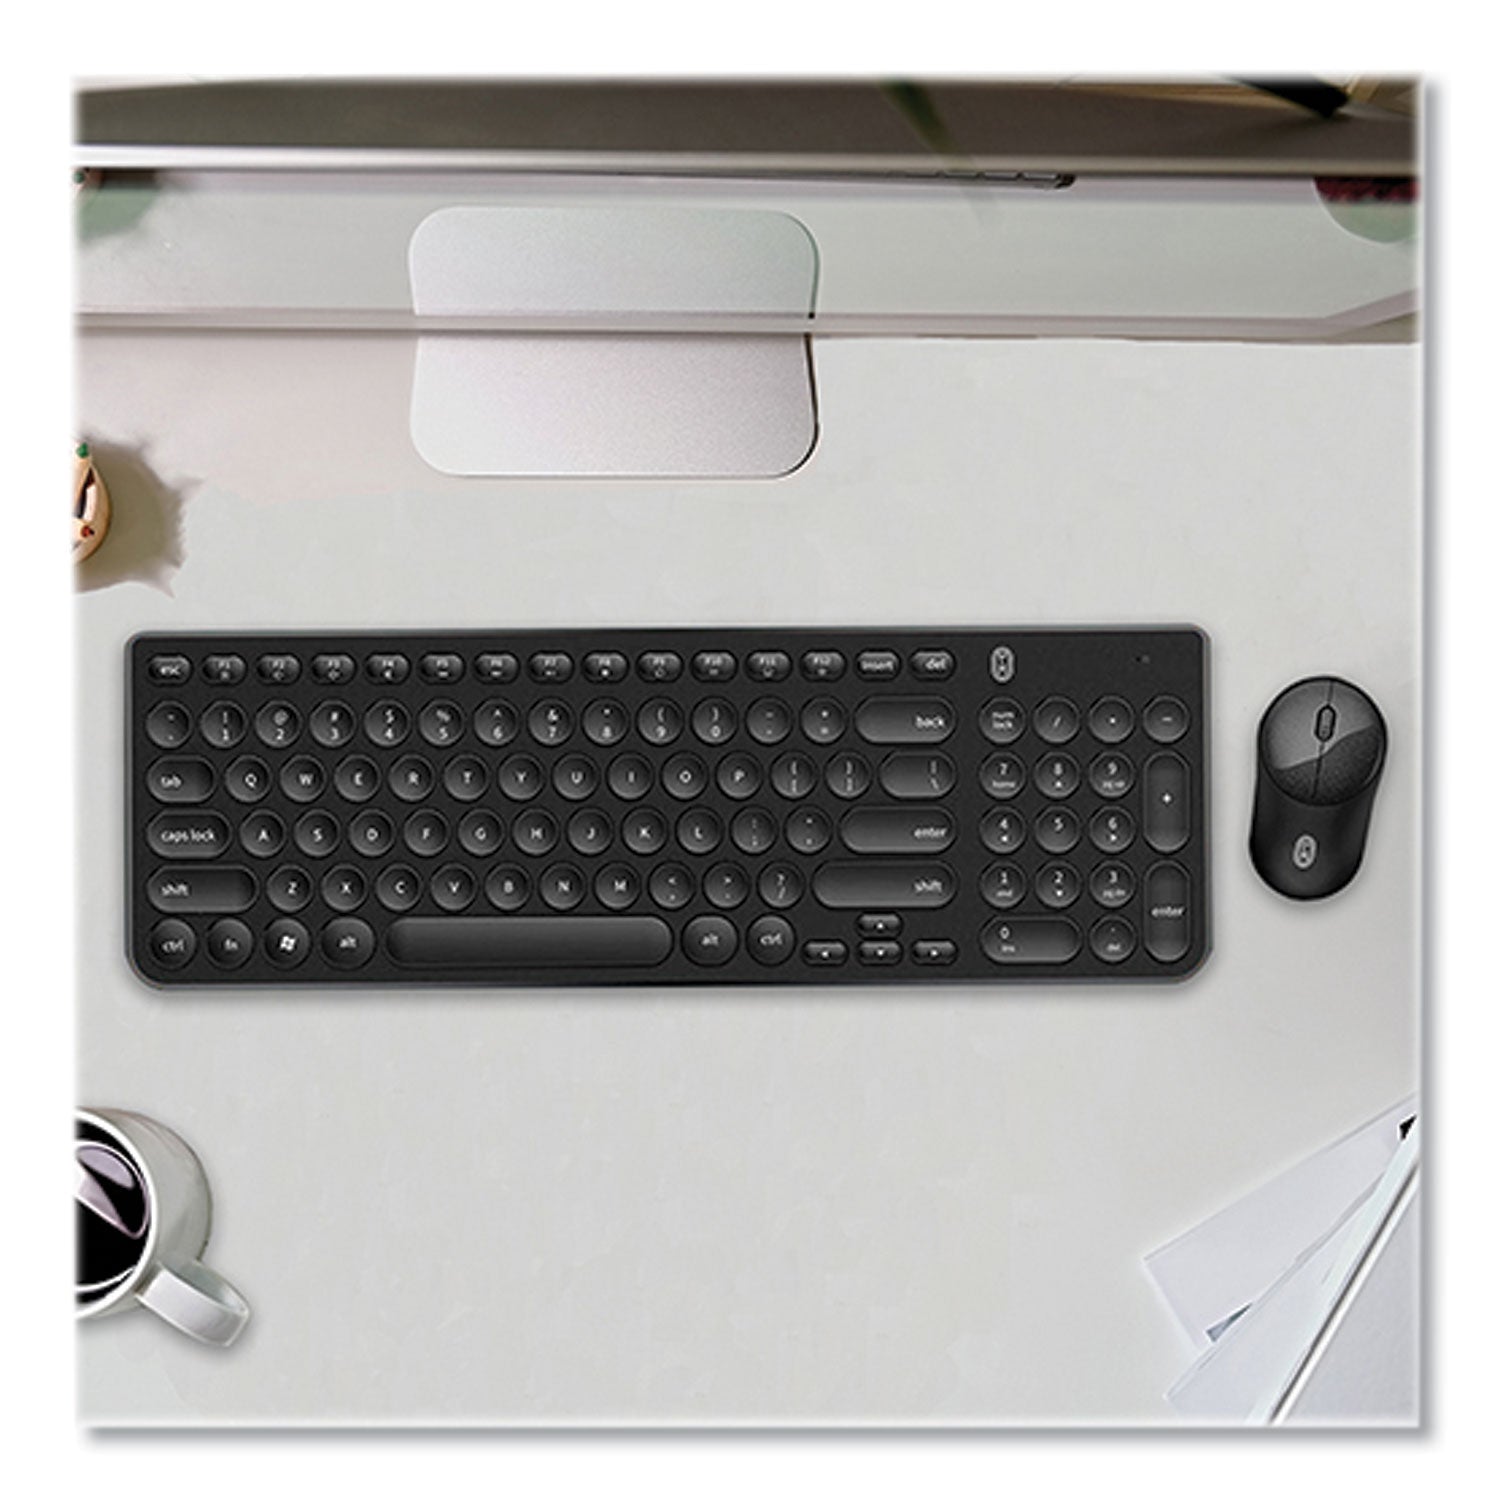 pro-wireless-keyboard-&-optical-mouse-combo-24-ghz-frequency-black_celrobb3wbk - 2